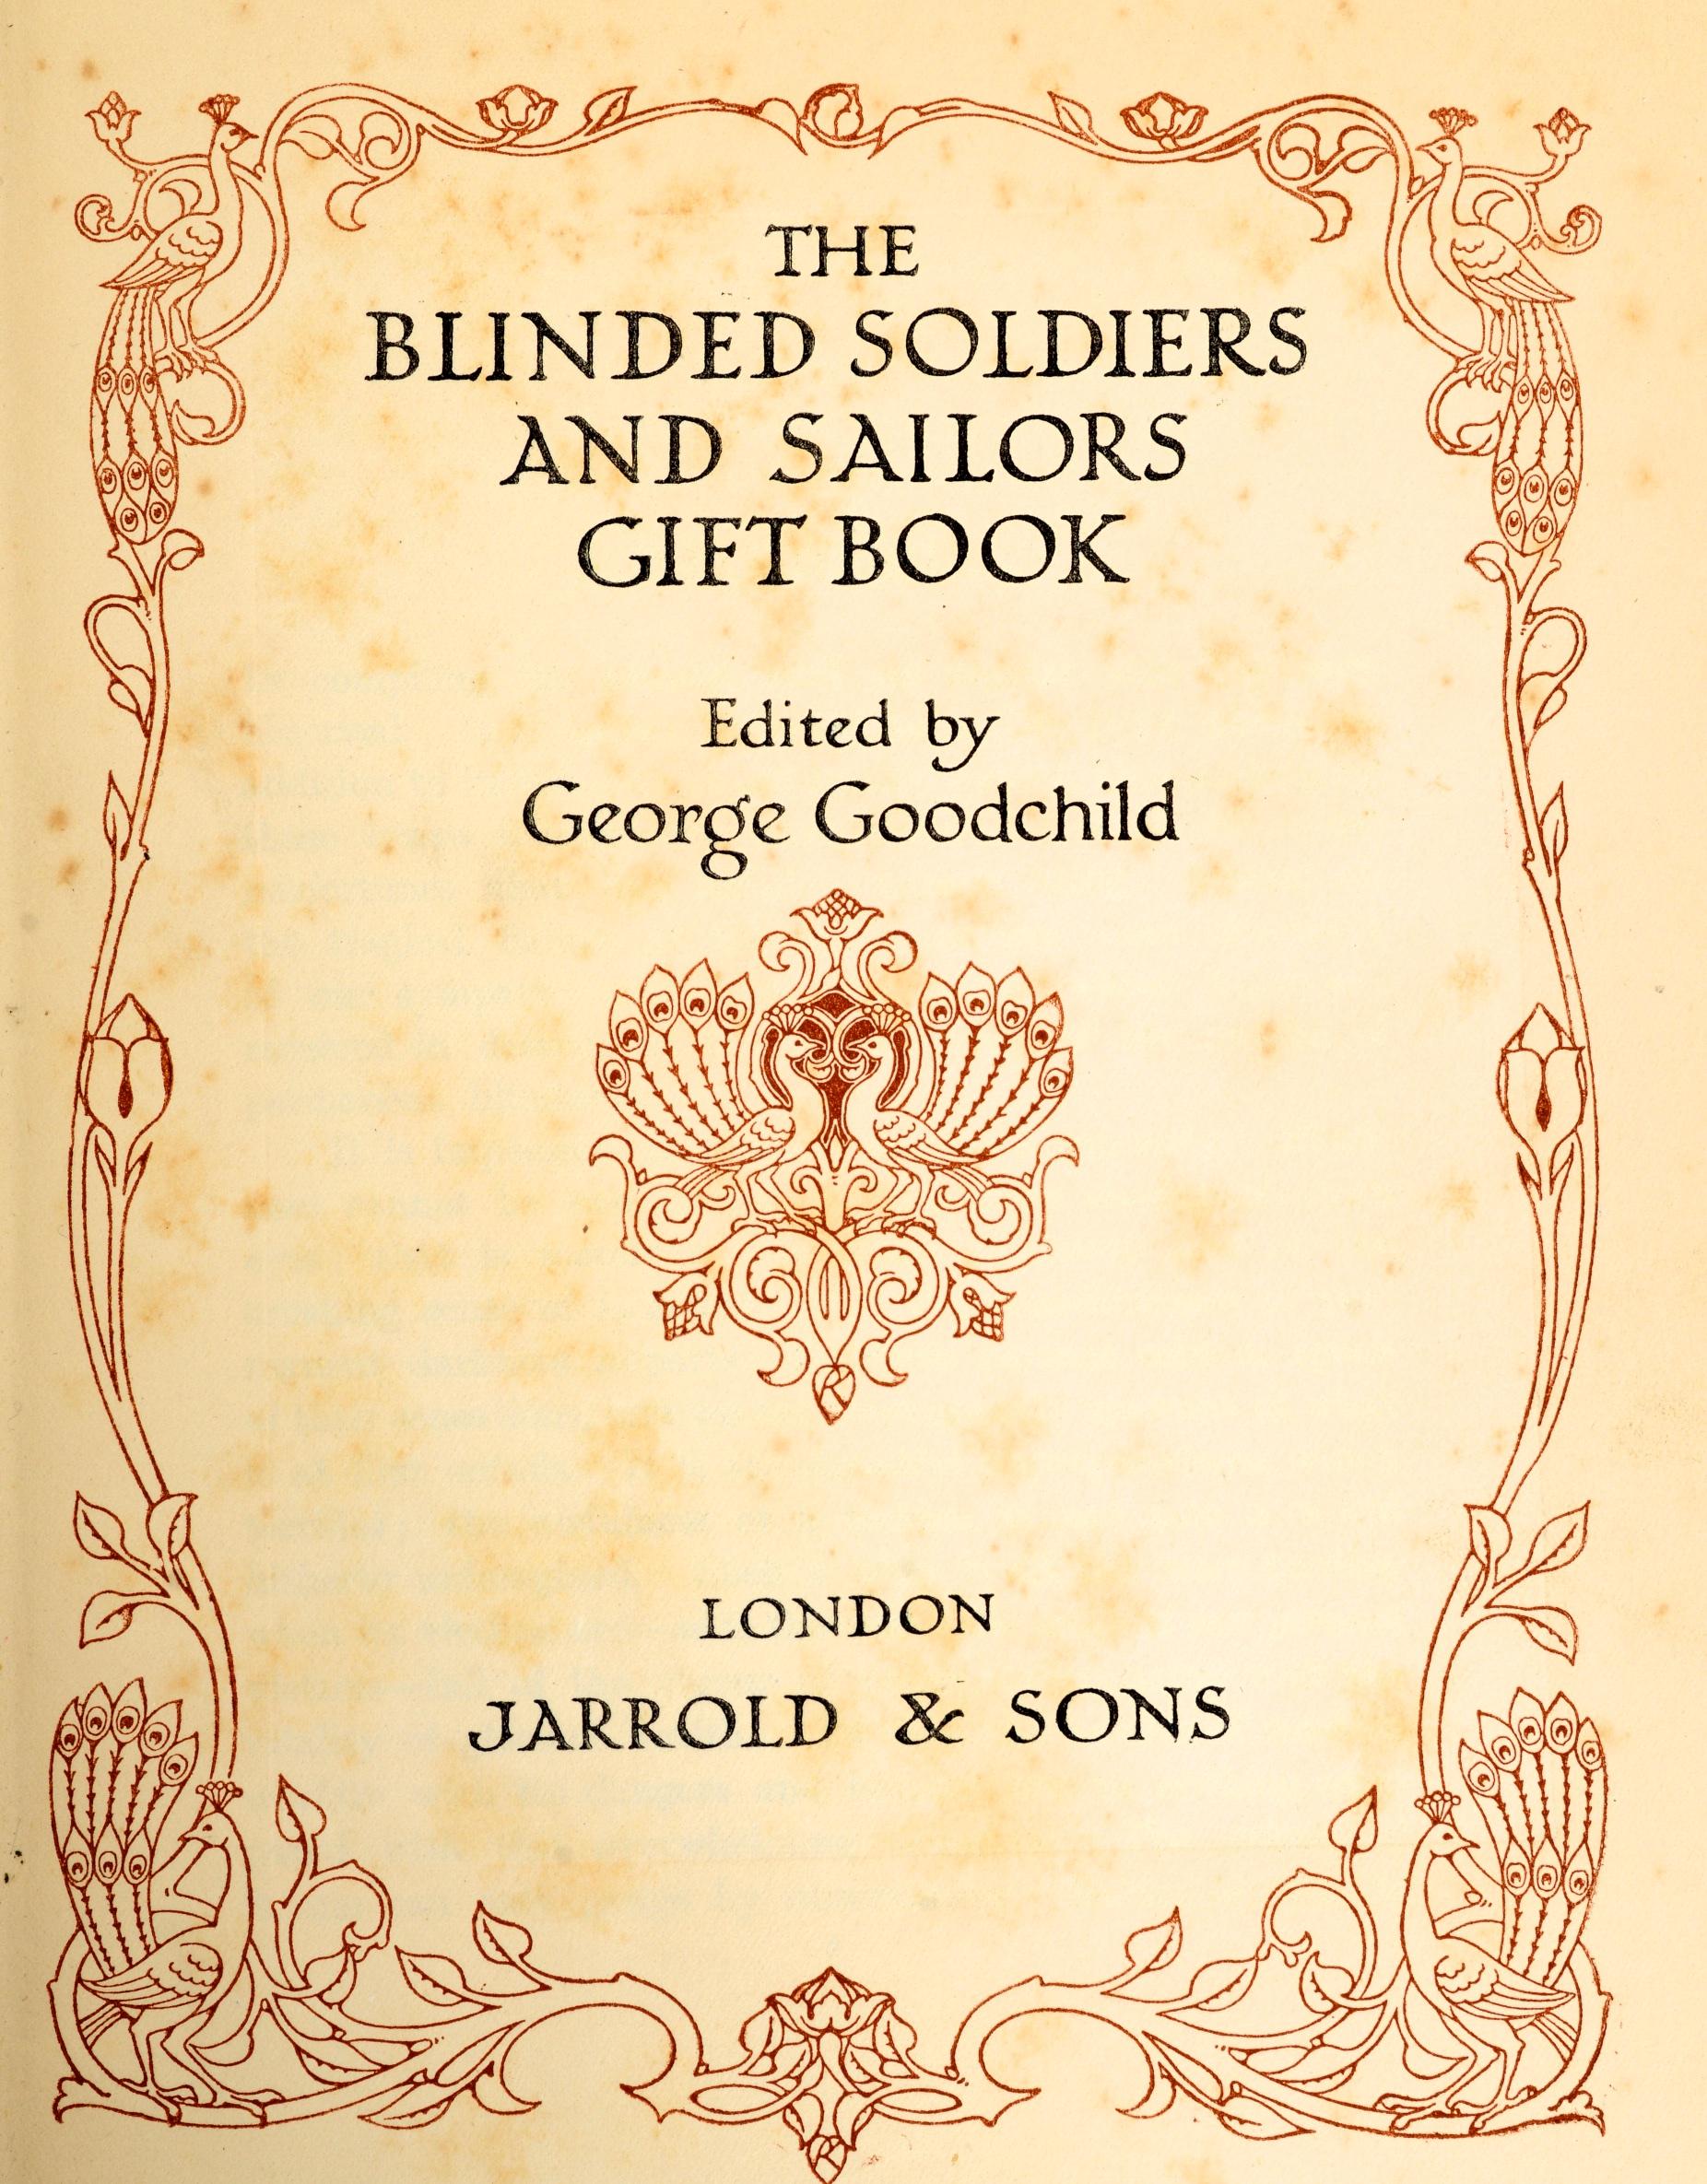 The Blinded Sailors and Soldiers Gift Book by George Goodchild. Jarrold & Sons, London 1915. 1st Ed hardcover. Tipped-in color frontispiece and eighteen plates in color. Published for the benefit of The Blinded Soldiers' and Sailors' Hostel, St.